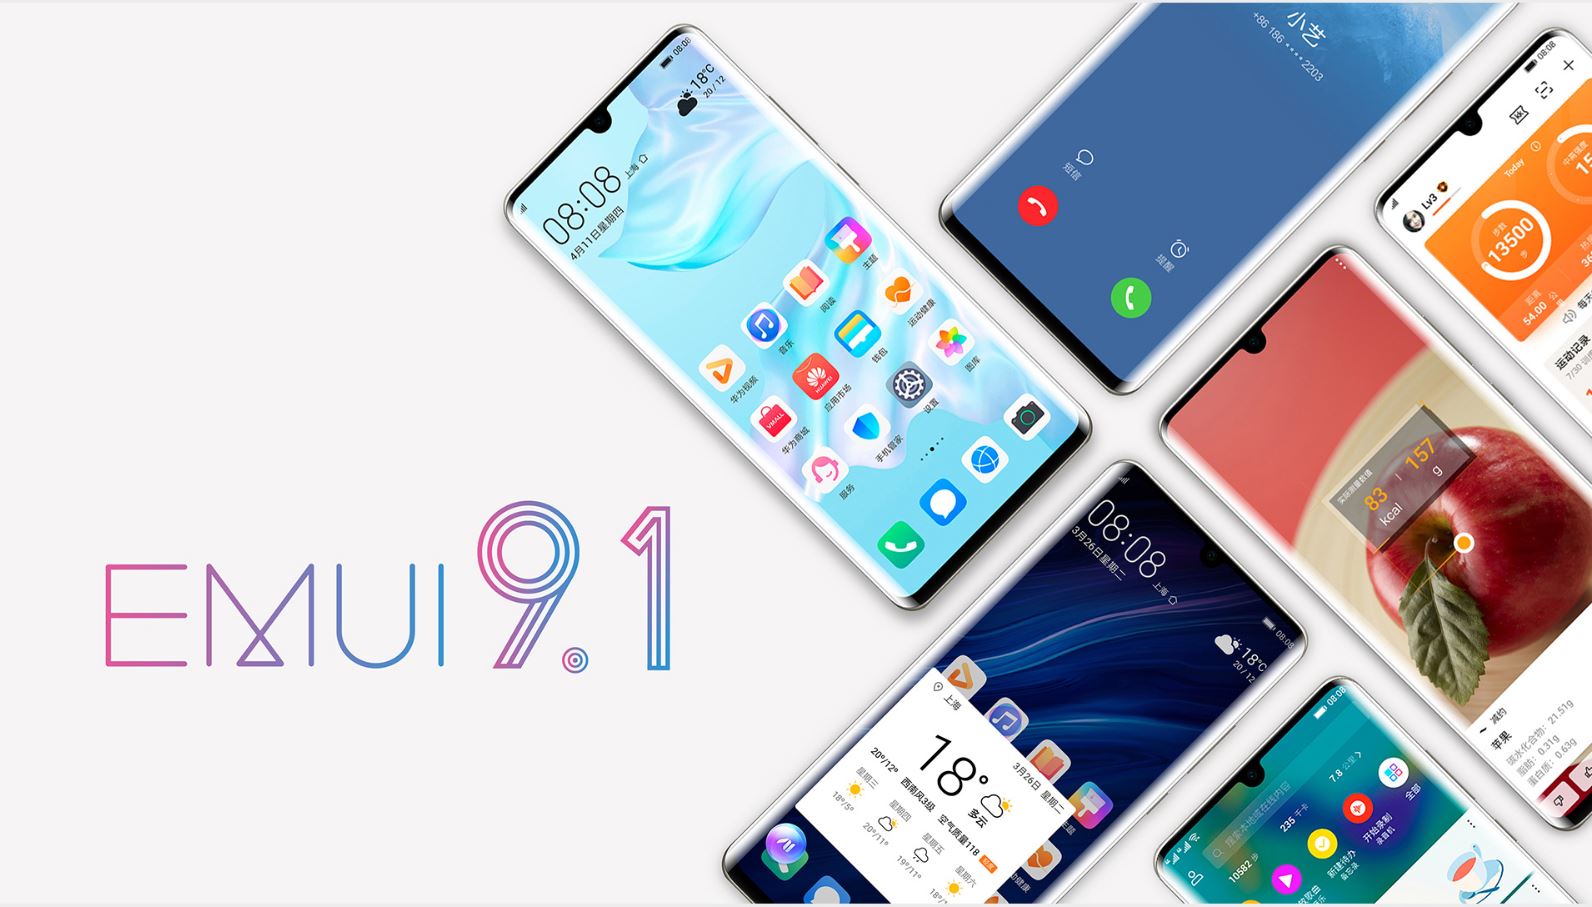 What Is Emui Complete Details Of Huawei S Android Skin Huawei Update